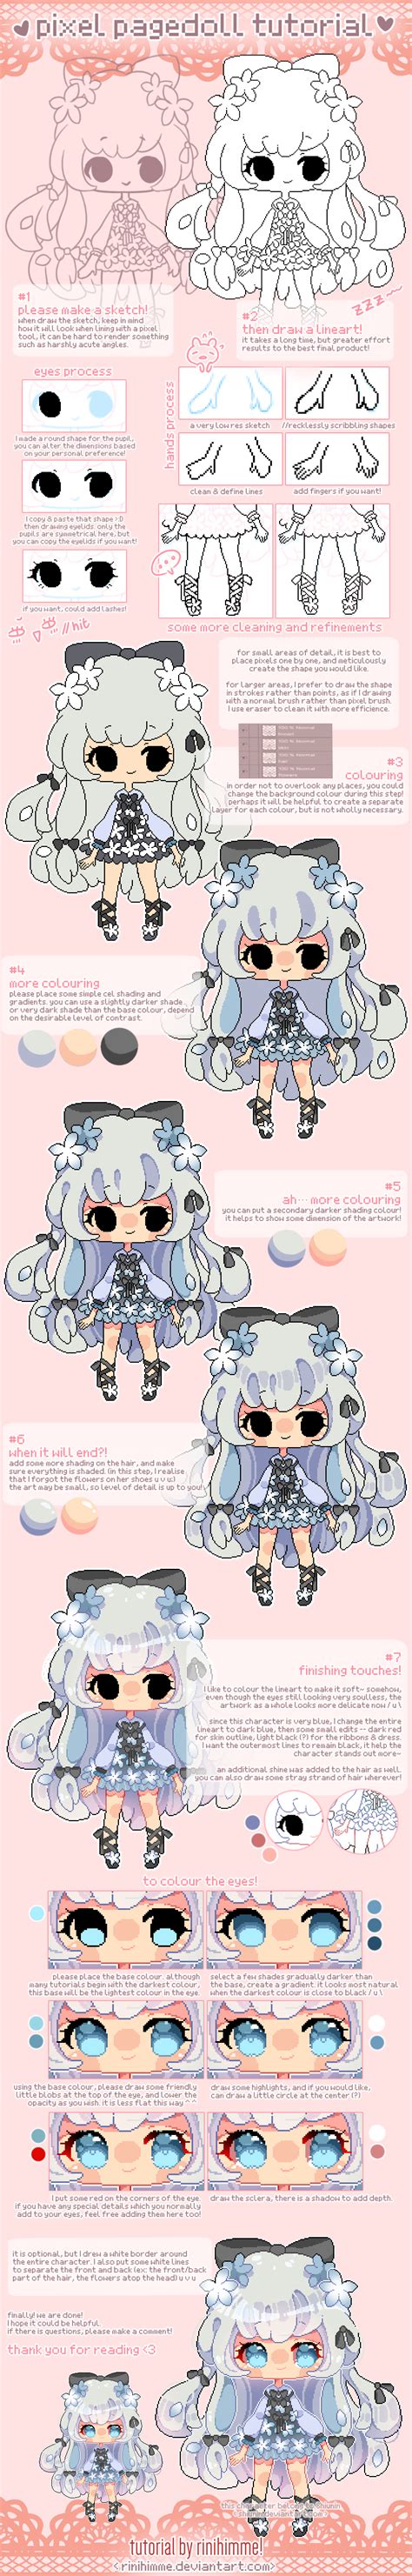 Rinis Pixel Pagedoll Tutorial By Rinihimme On Deviantart